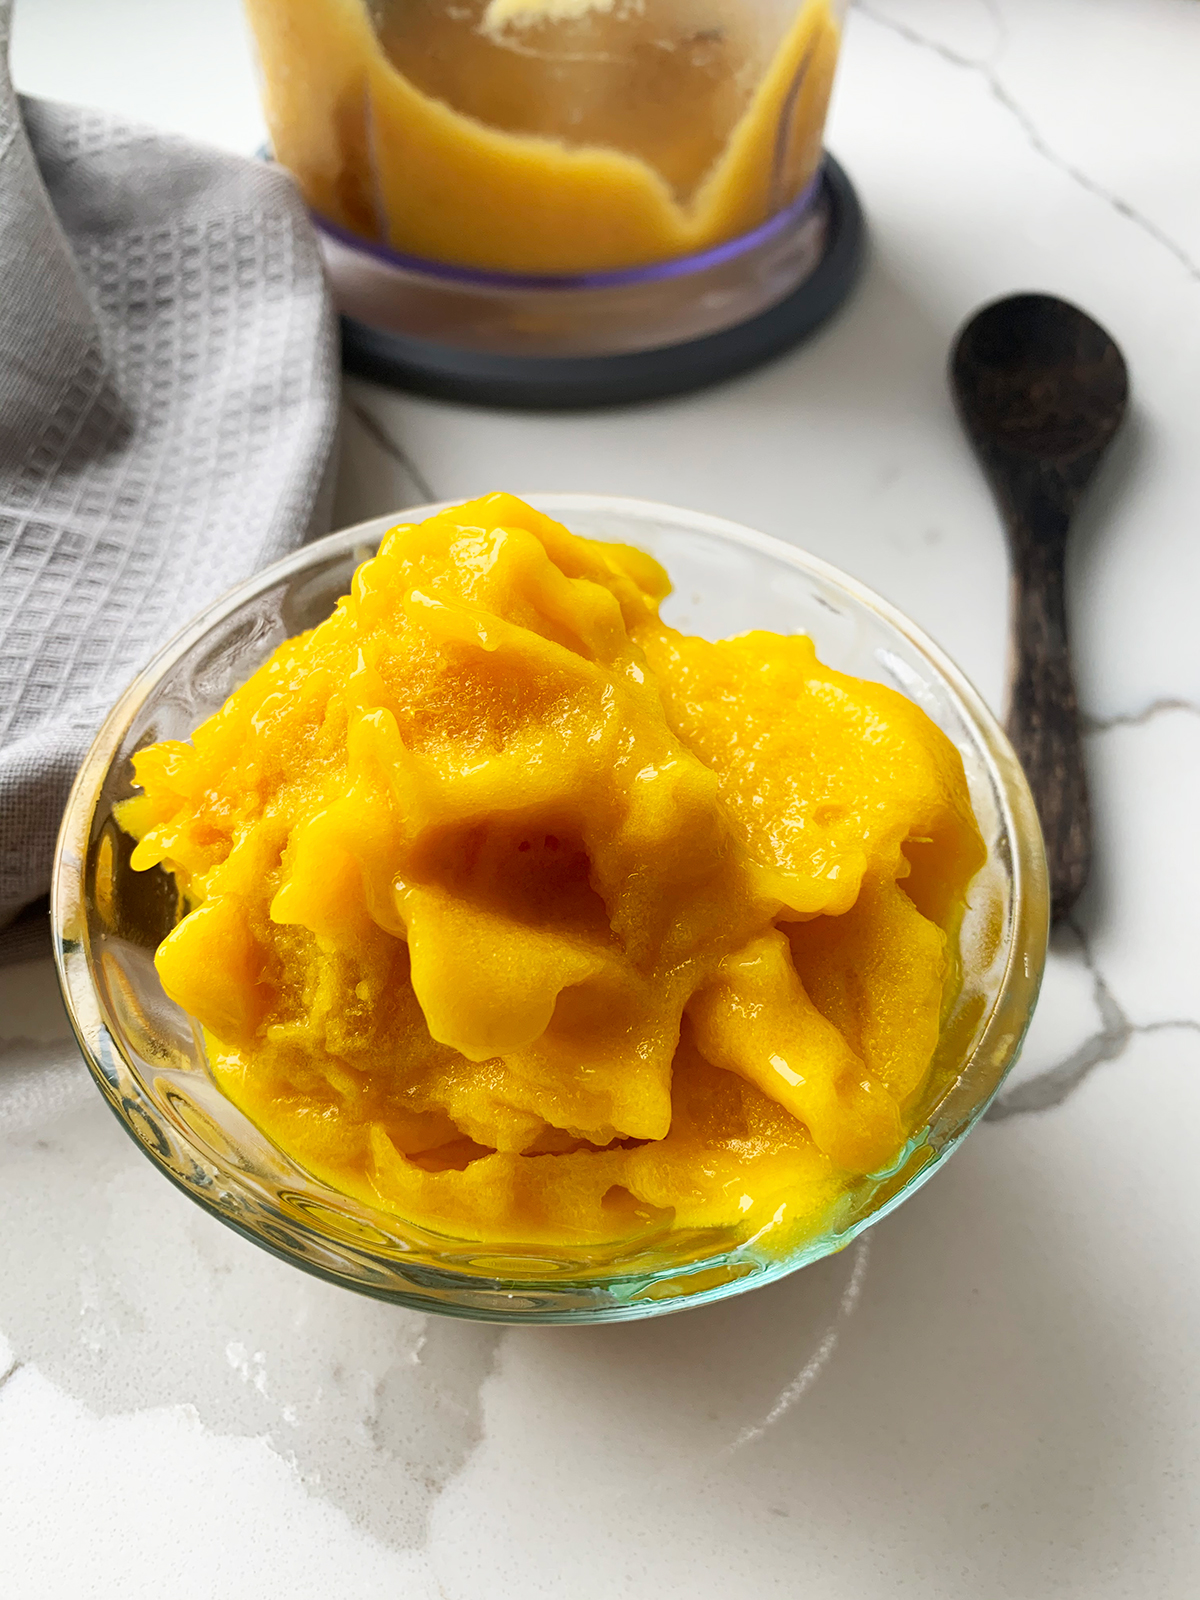 All natural mango sorbert served in a glass bowl